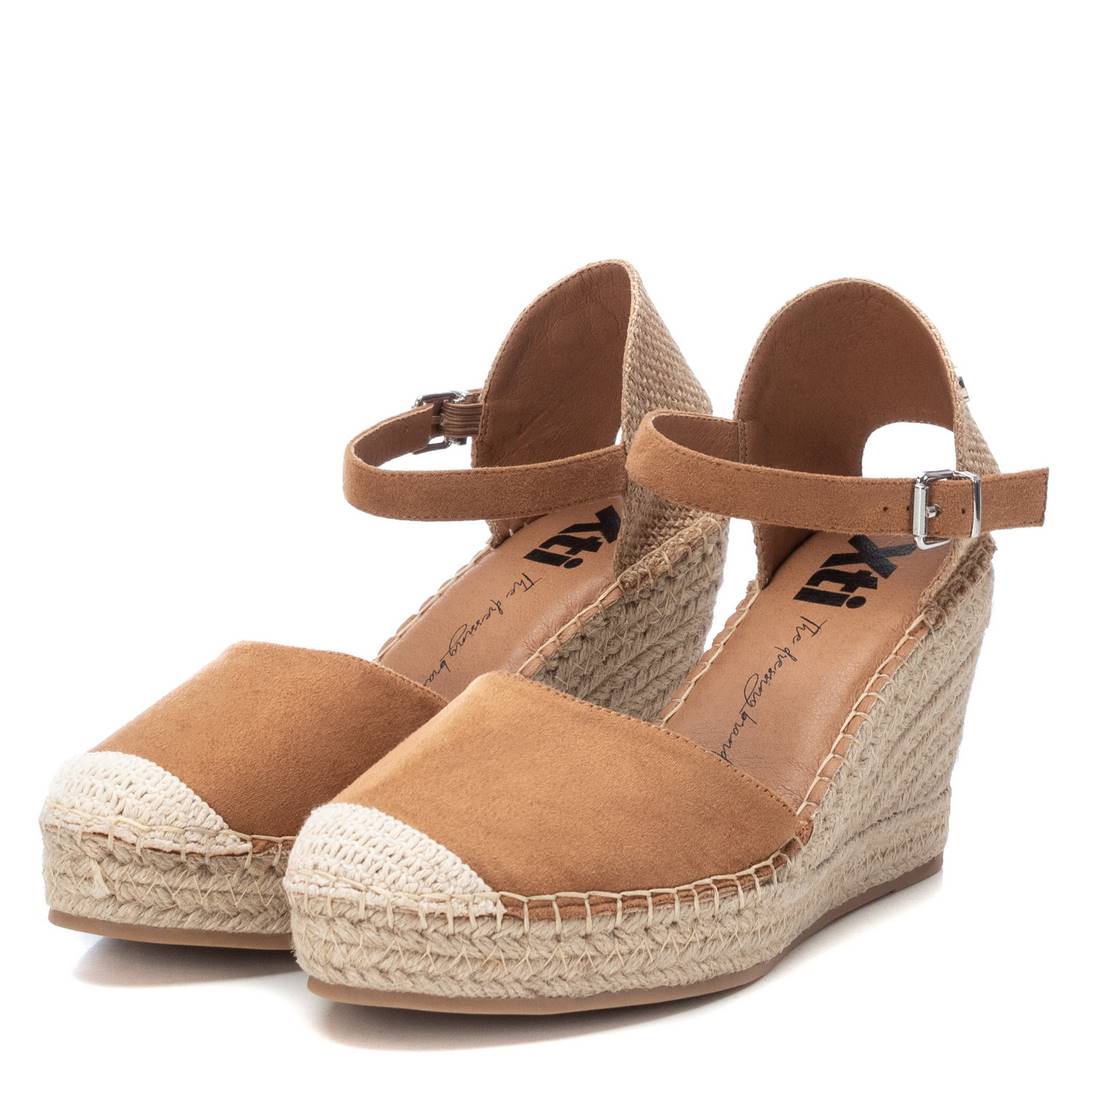 Close-up of the jute-wrapped wedge and non-slip rubber sole for elegance and safety.